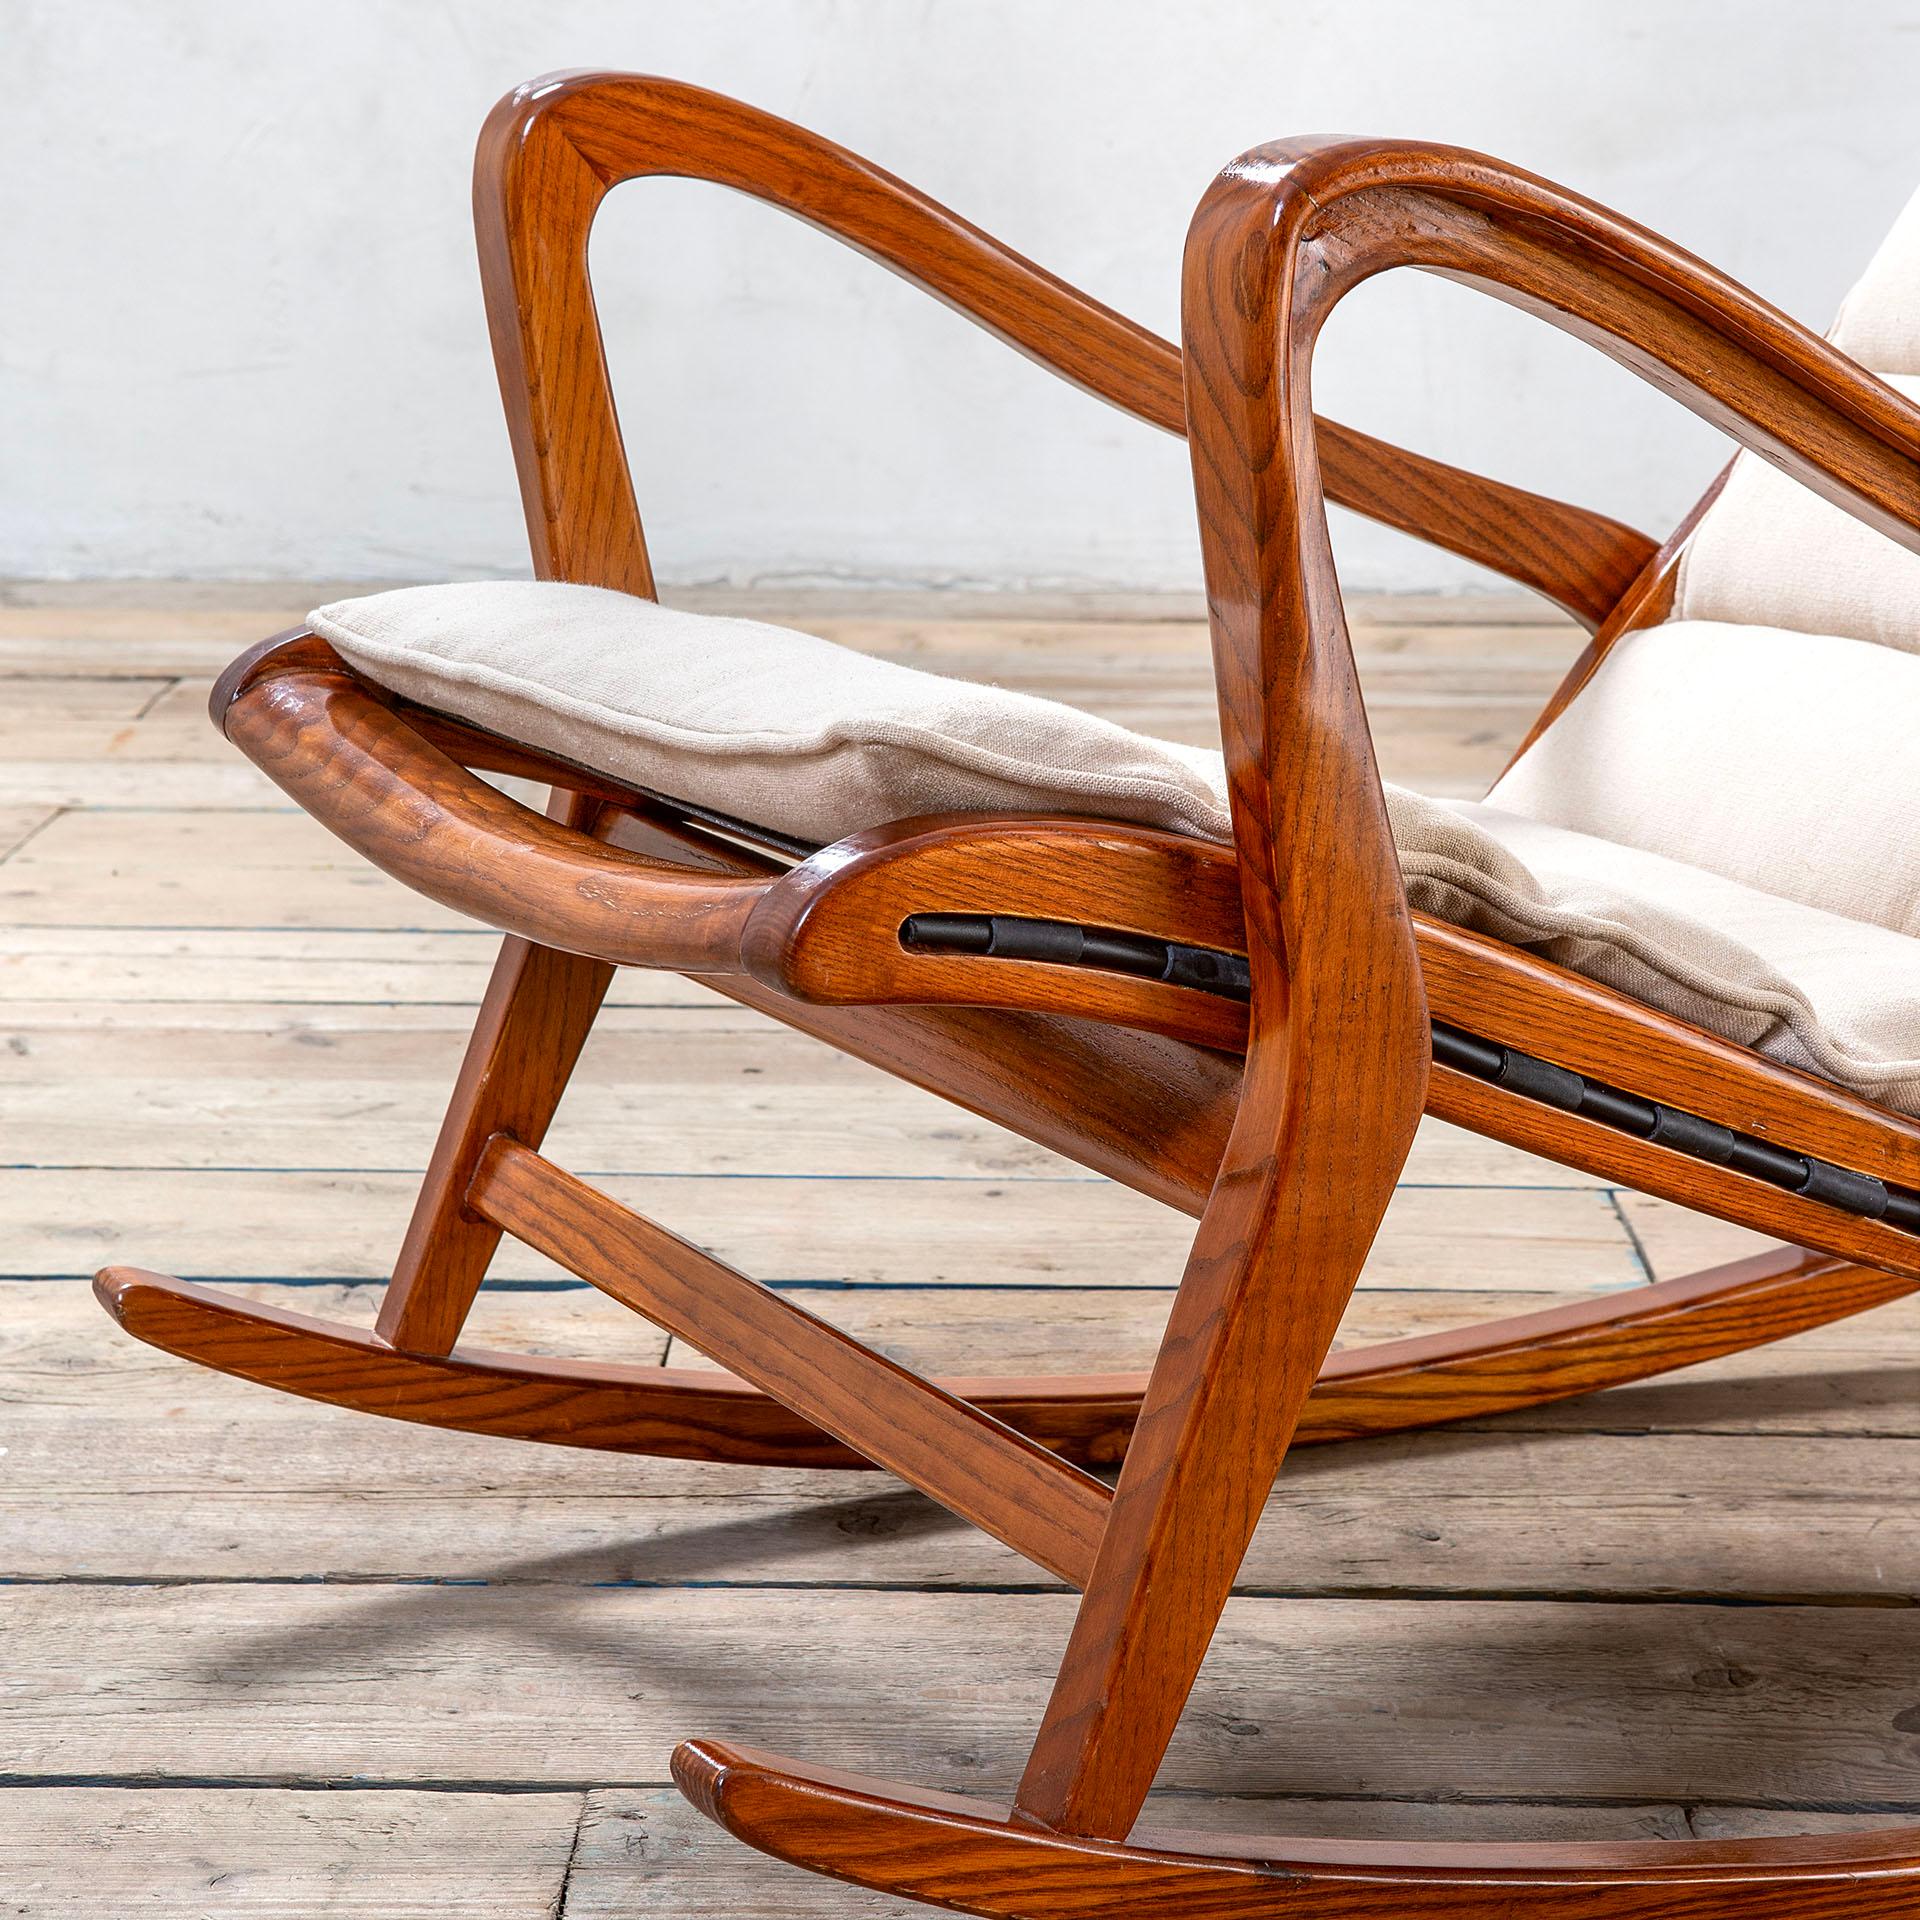 Upholstery 20th Century Cassina Rocking Chair mod. 572 in Wood and Fabric, 1950s For Sale